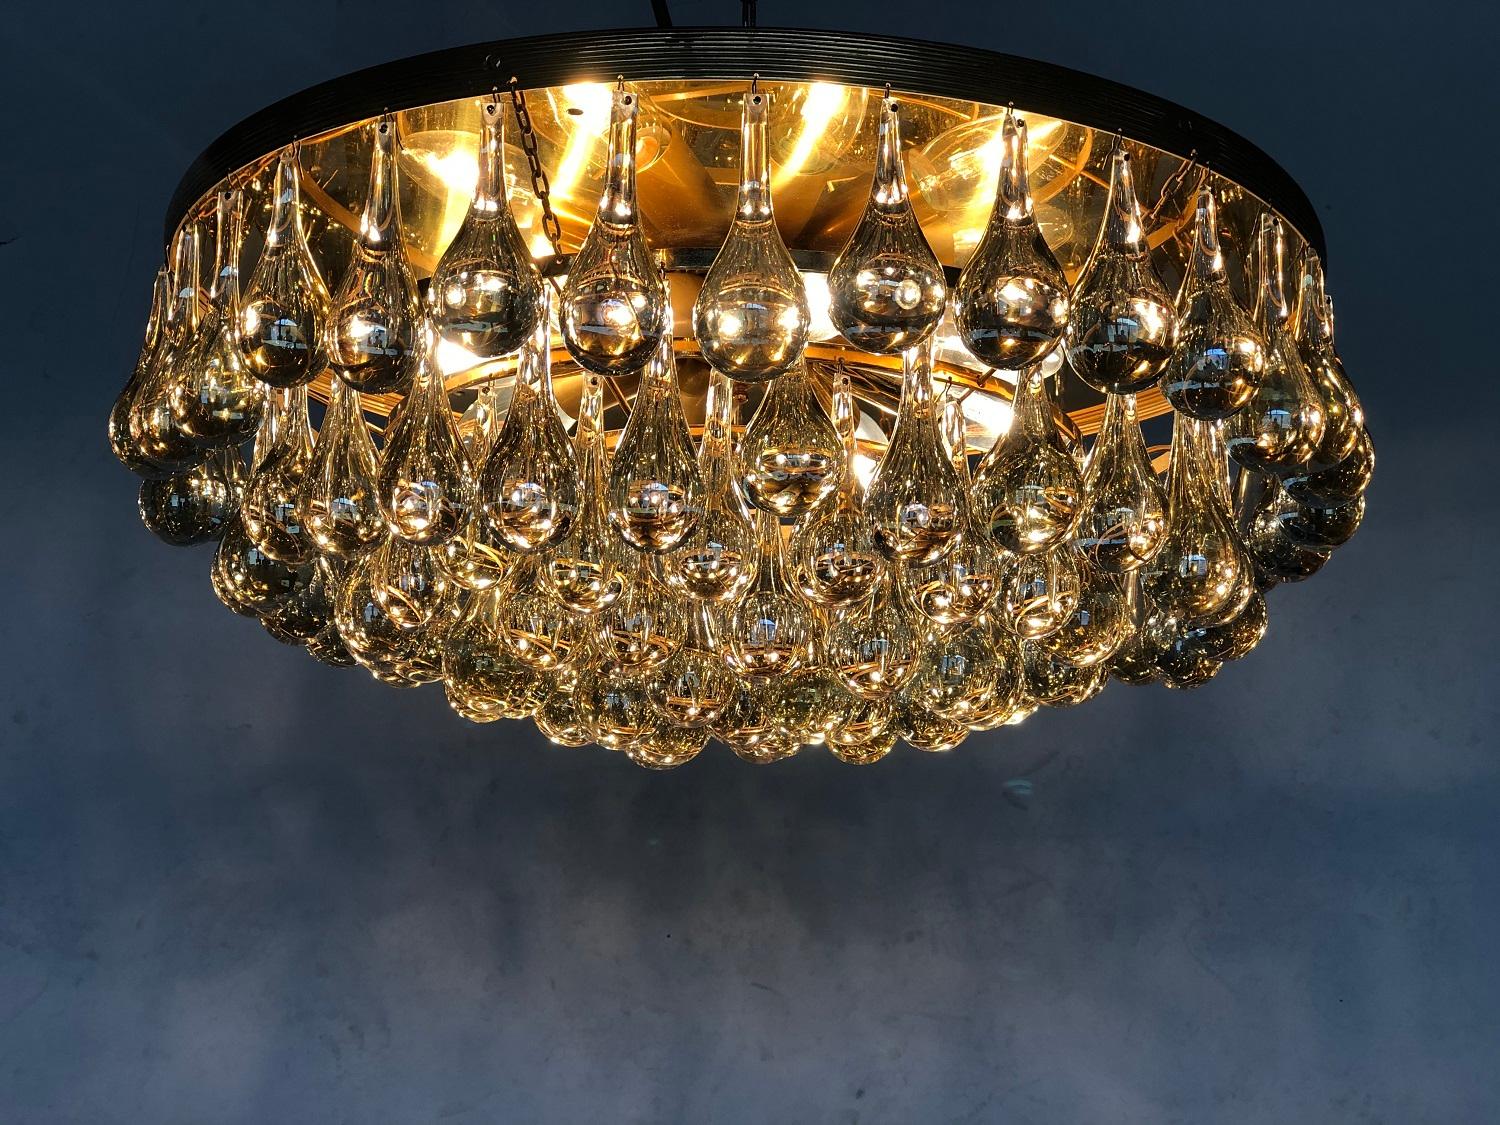 Magnificent flushmount chandelier with 101 handcrafted big size tear drops made in Murano of shiny iridescent Murano glass.
Produced for Palwa, Germany, in the 1970s. This kind of glass drops are very rare!
The glass shimmers in